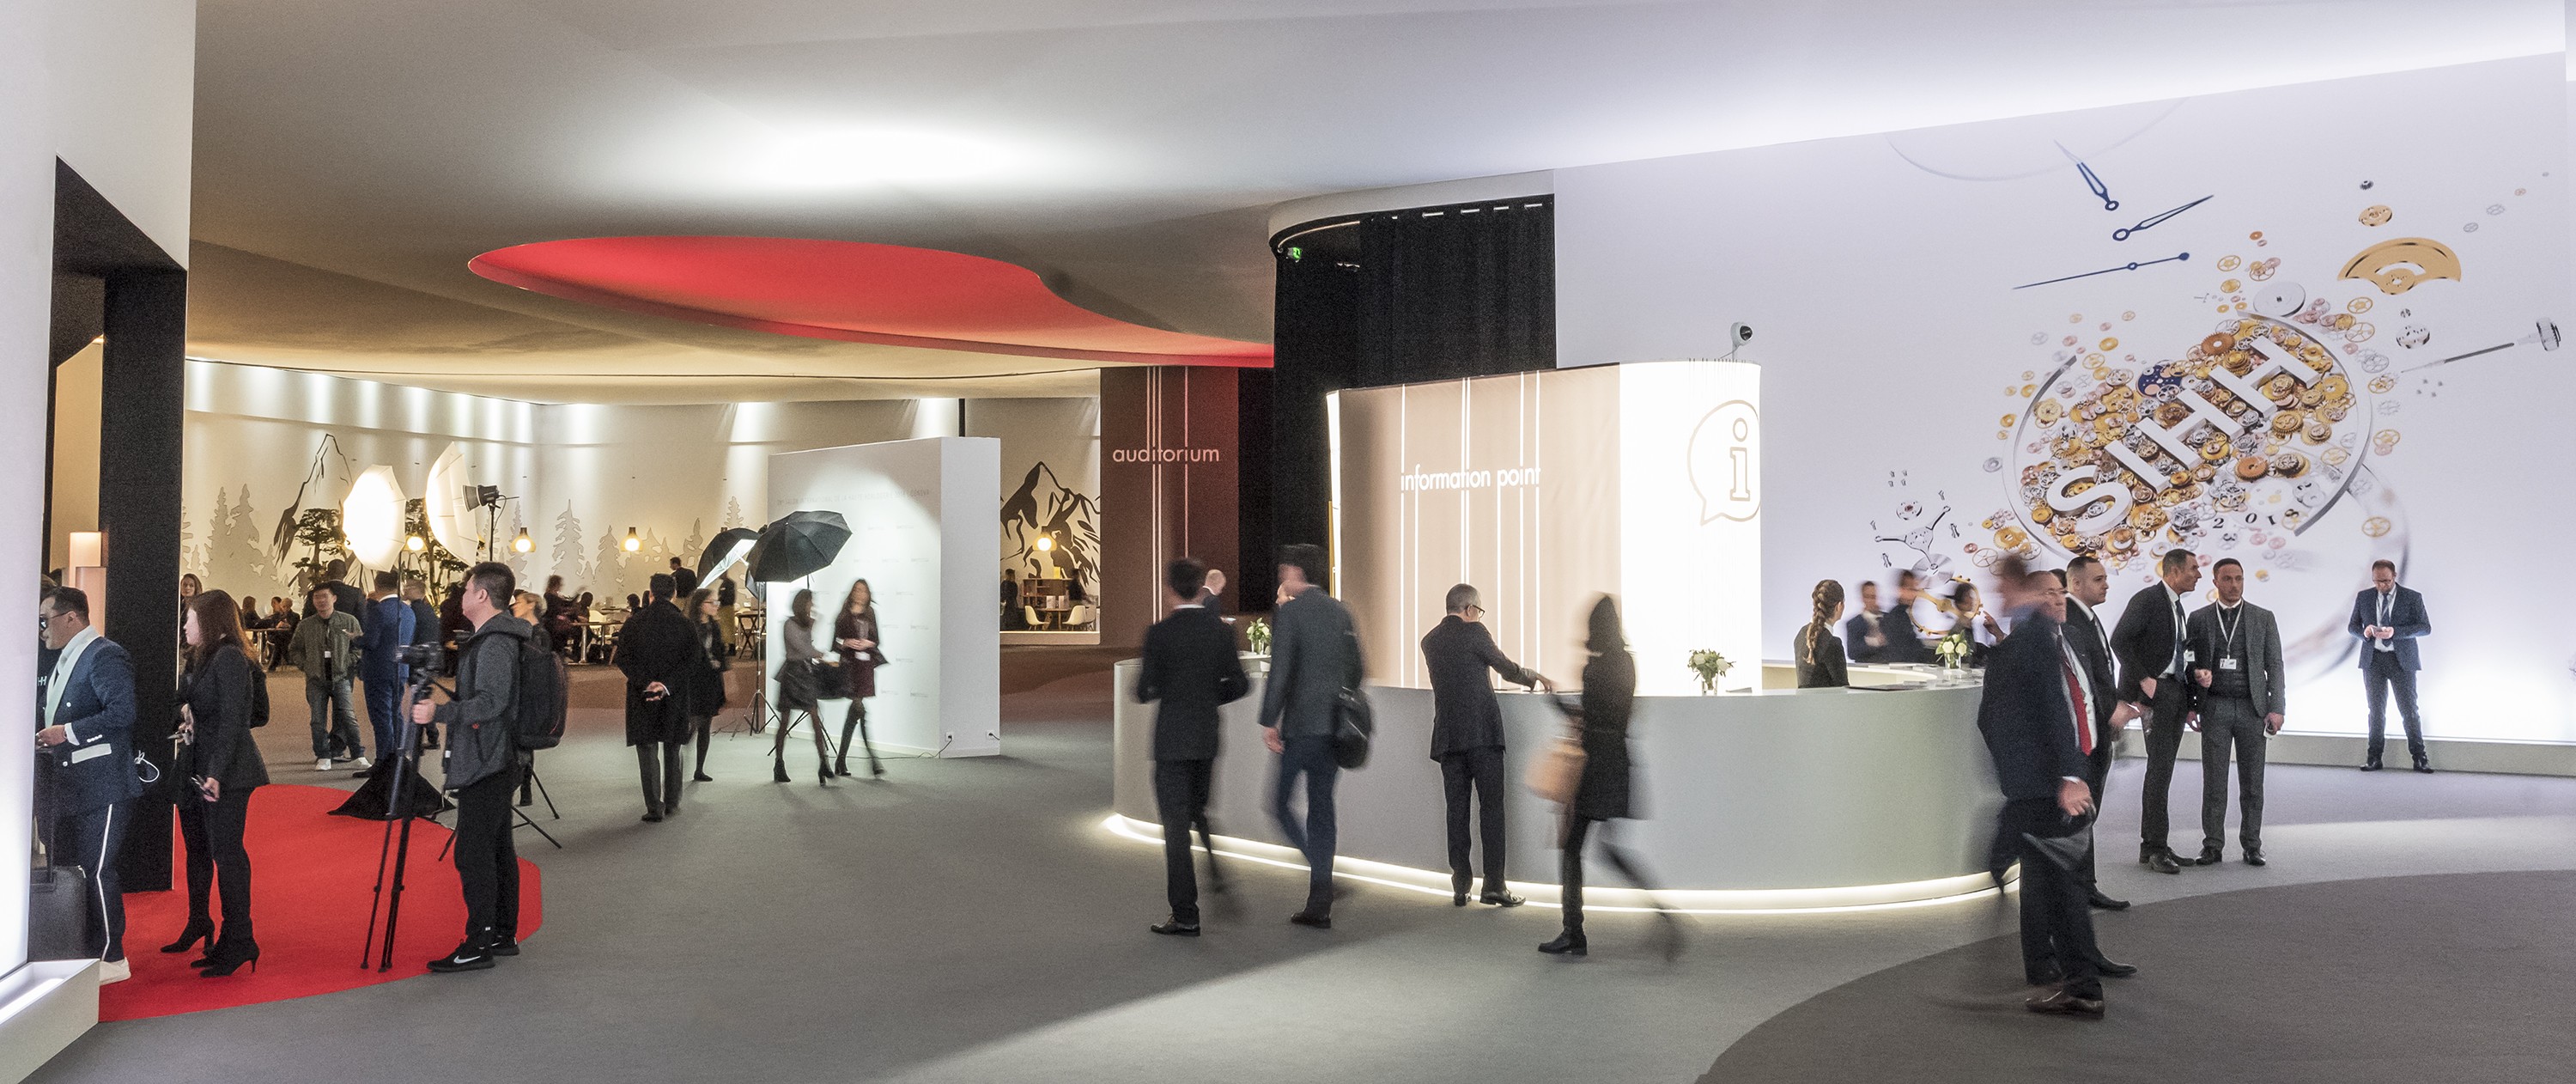 This year’s SIHH at Geneva’s PalExpo welcomed exhibitors and guests to a more spacious event with new VIP areas, digital stations and a live auditorium for talks and presentations.